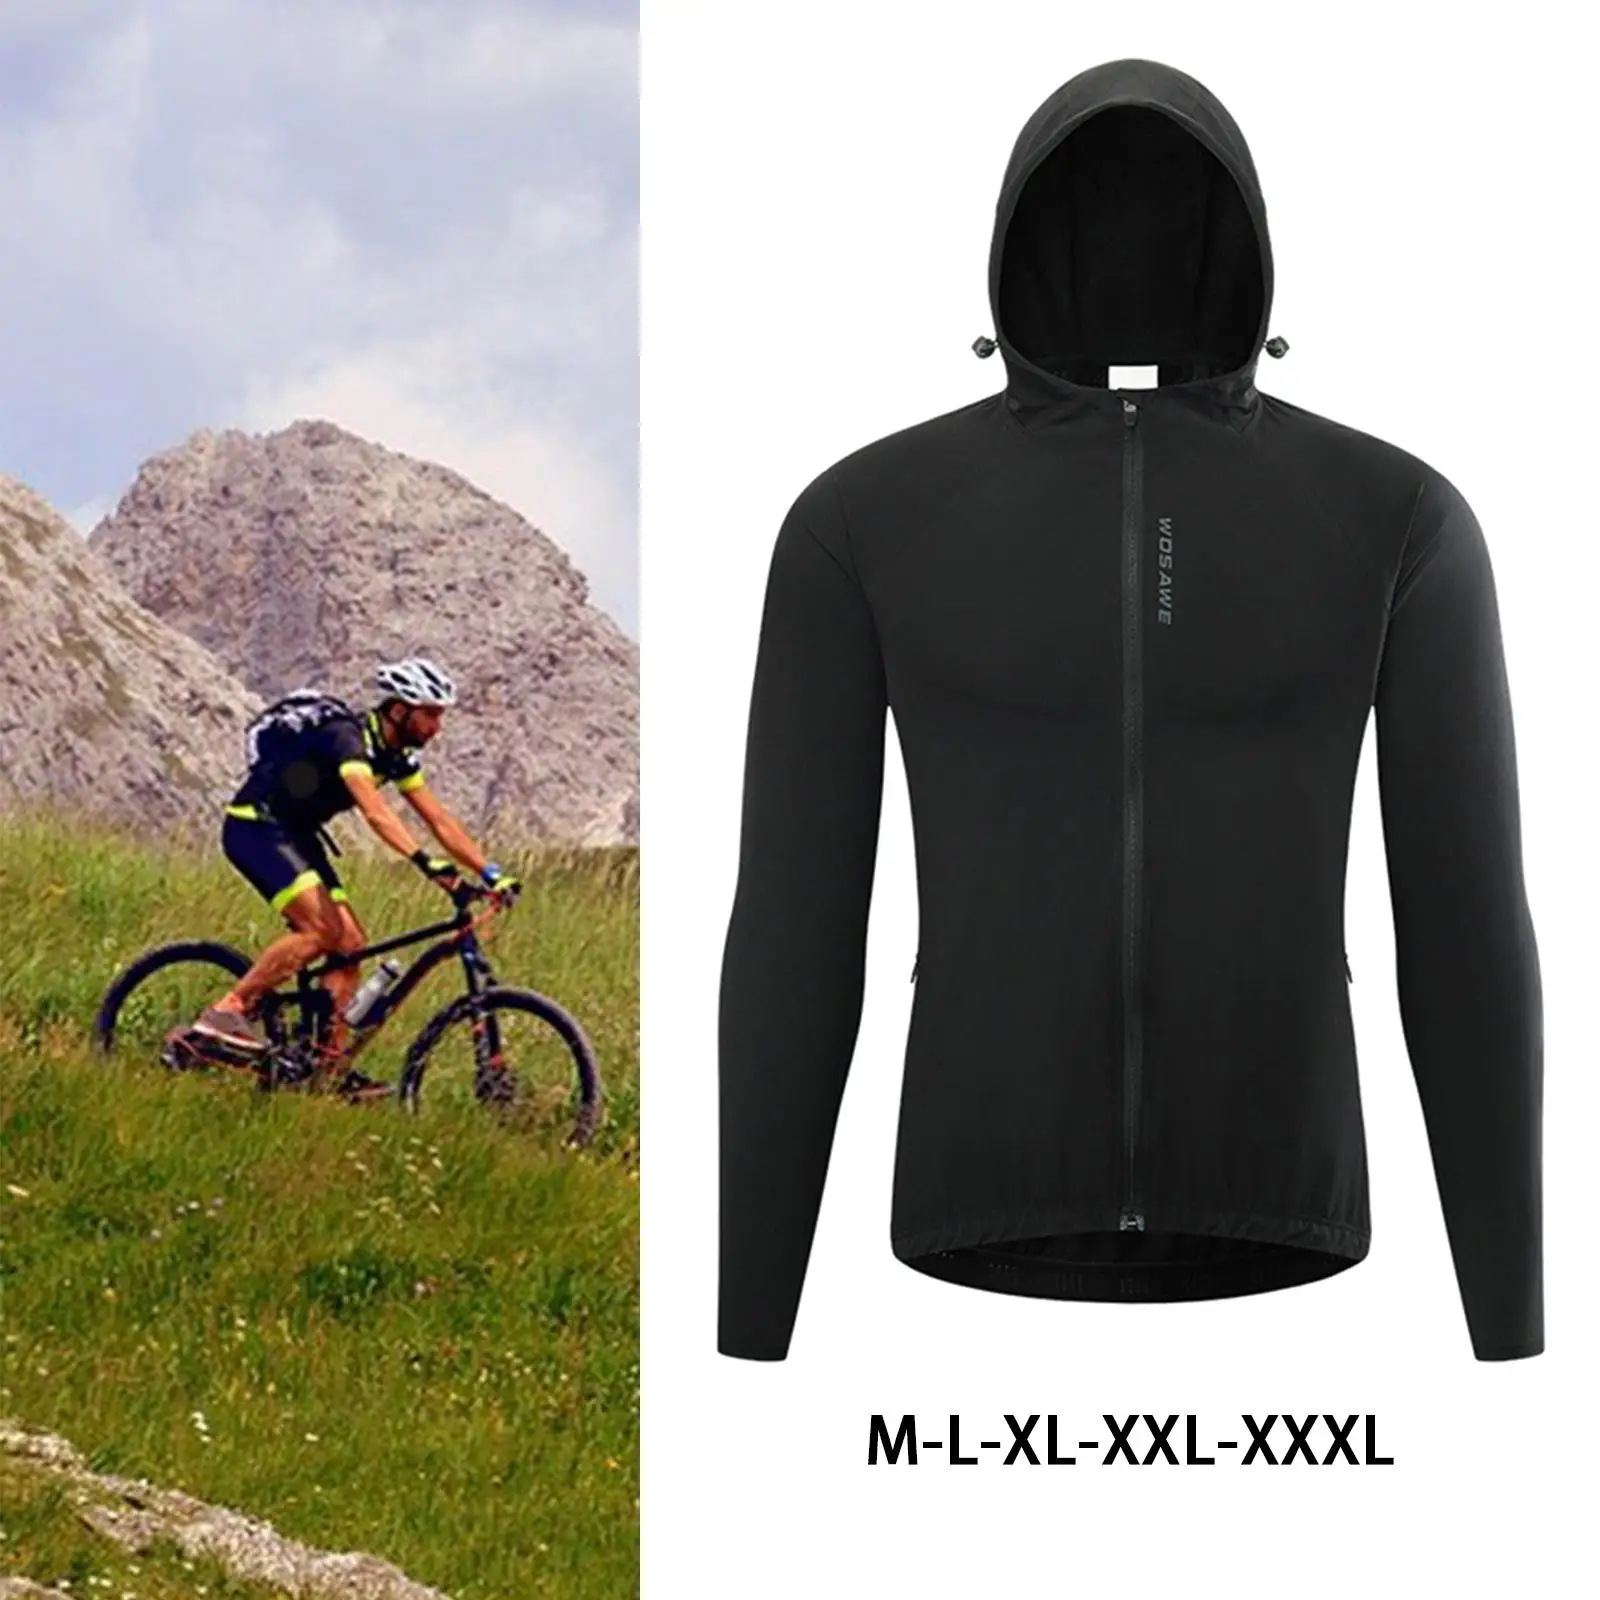 Bike Cycling Jacket for Men Breathable Lightweight Thermal Hooded Coat